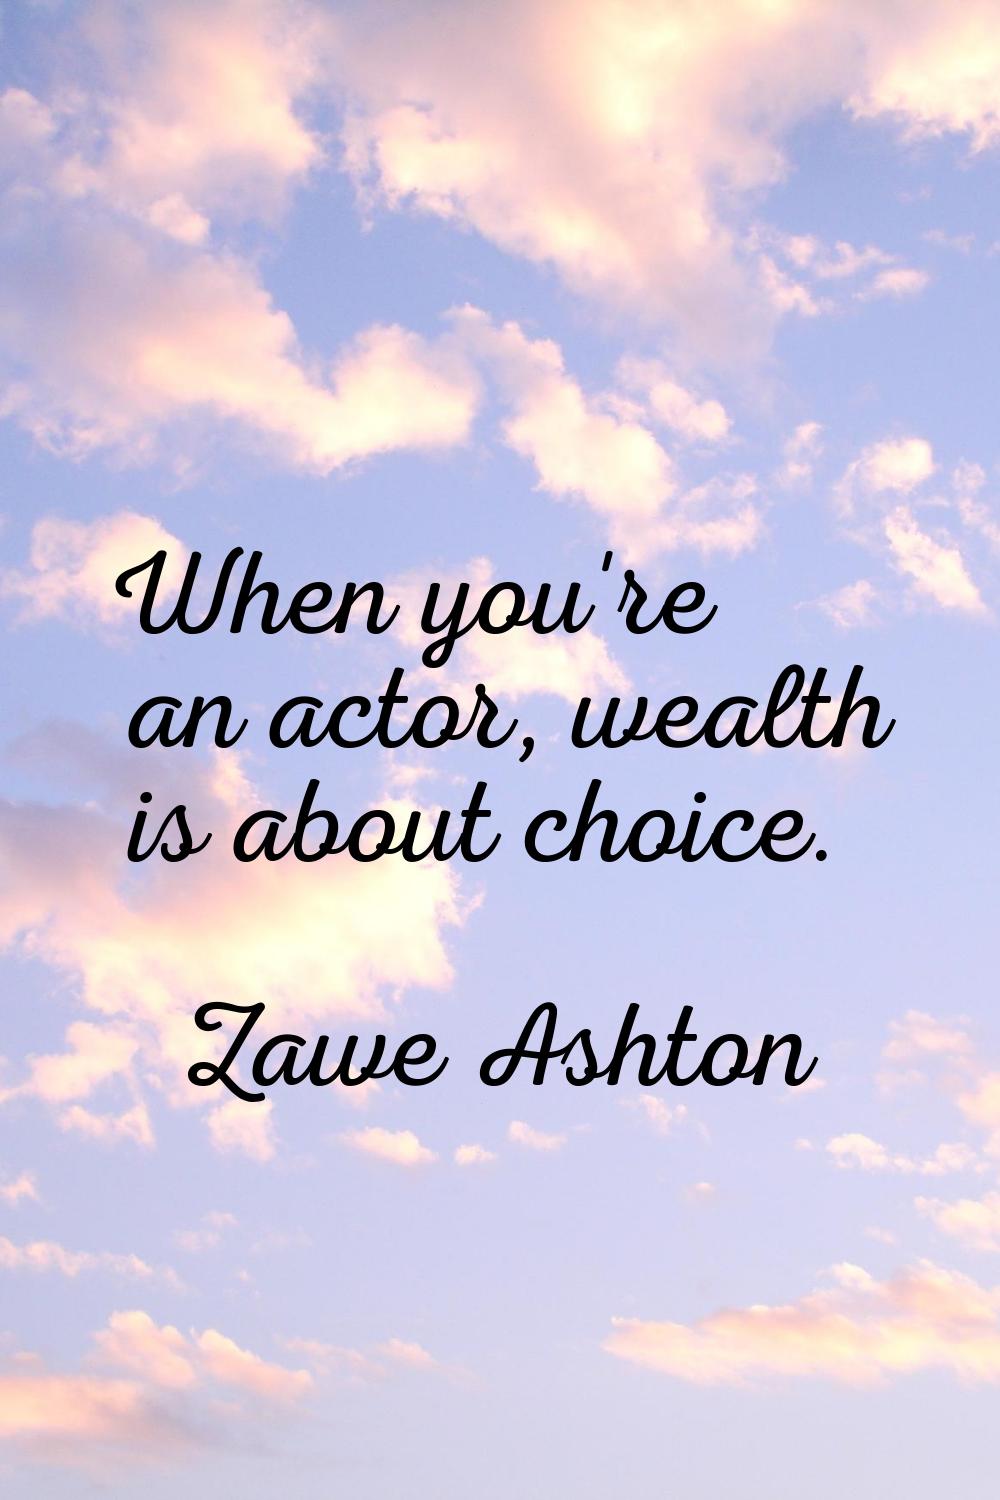 When you're an actor, wealth is about choice.